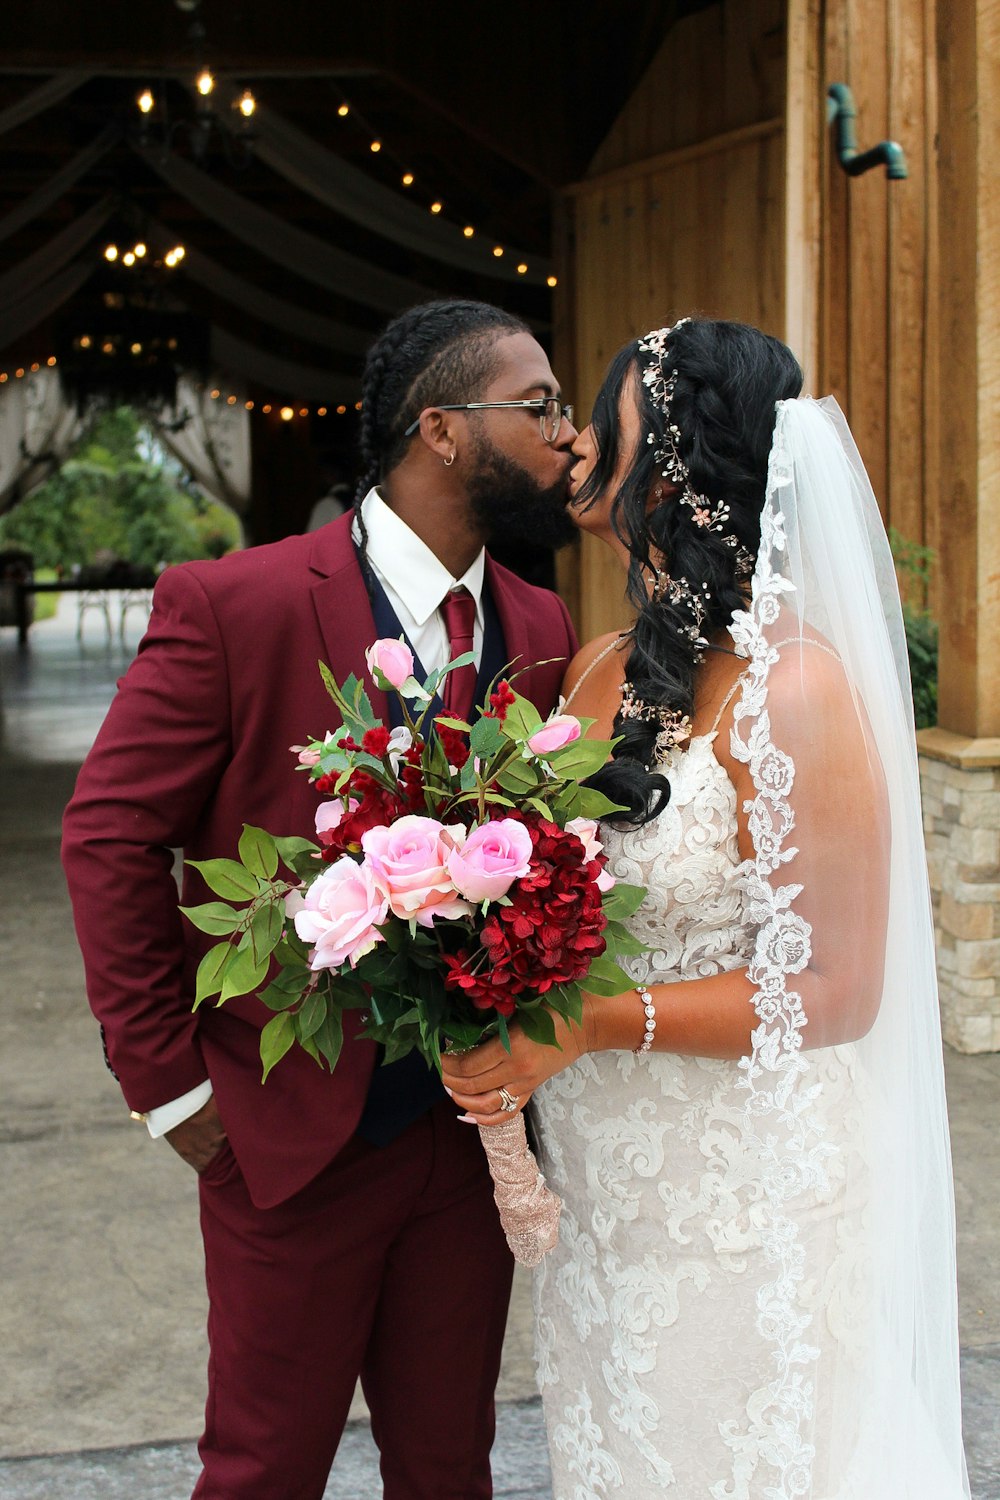 man in red suit and woman in white wedding dress